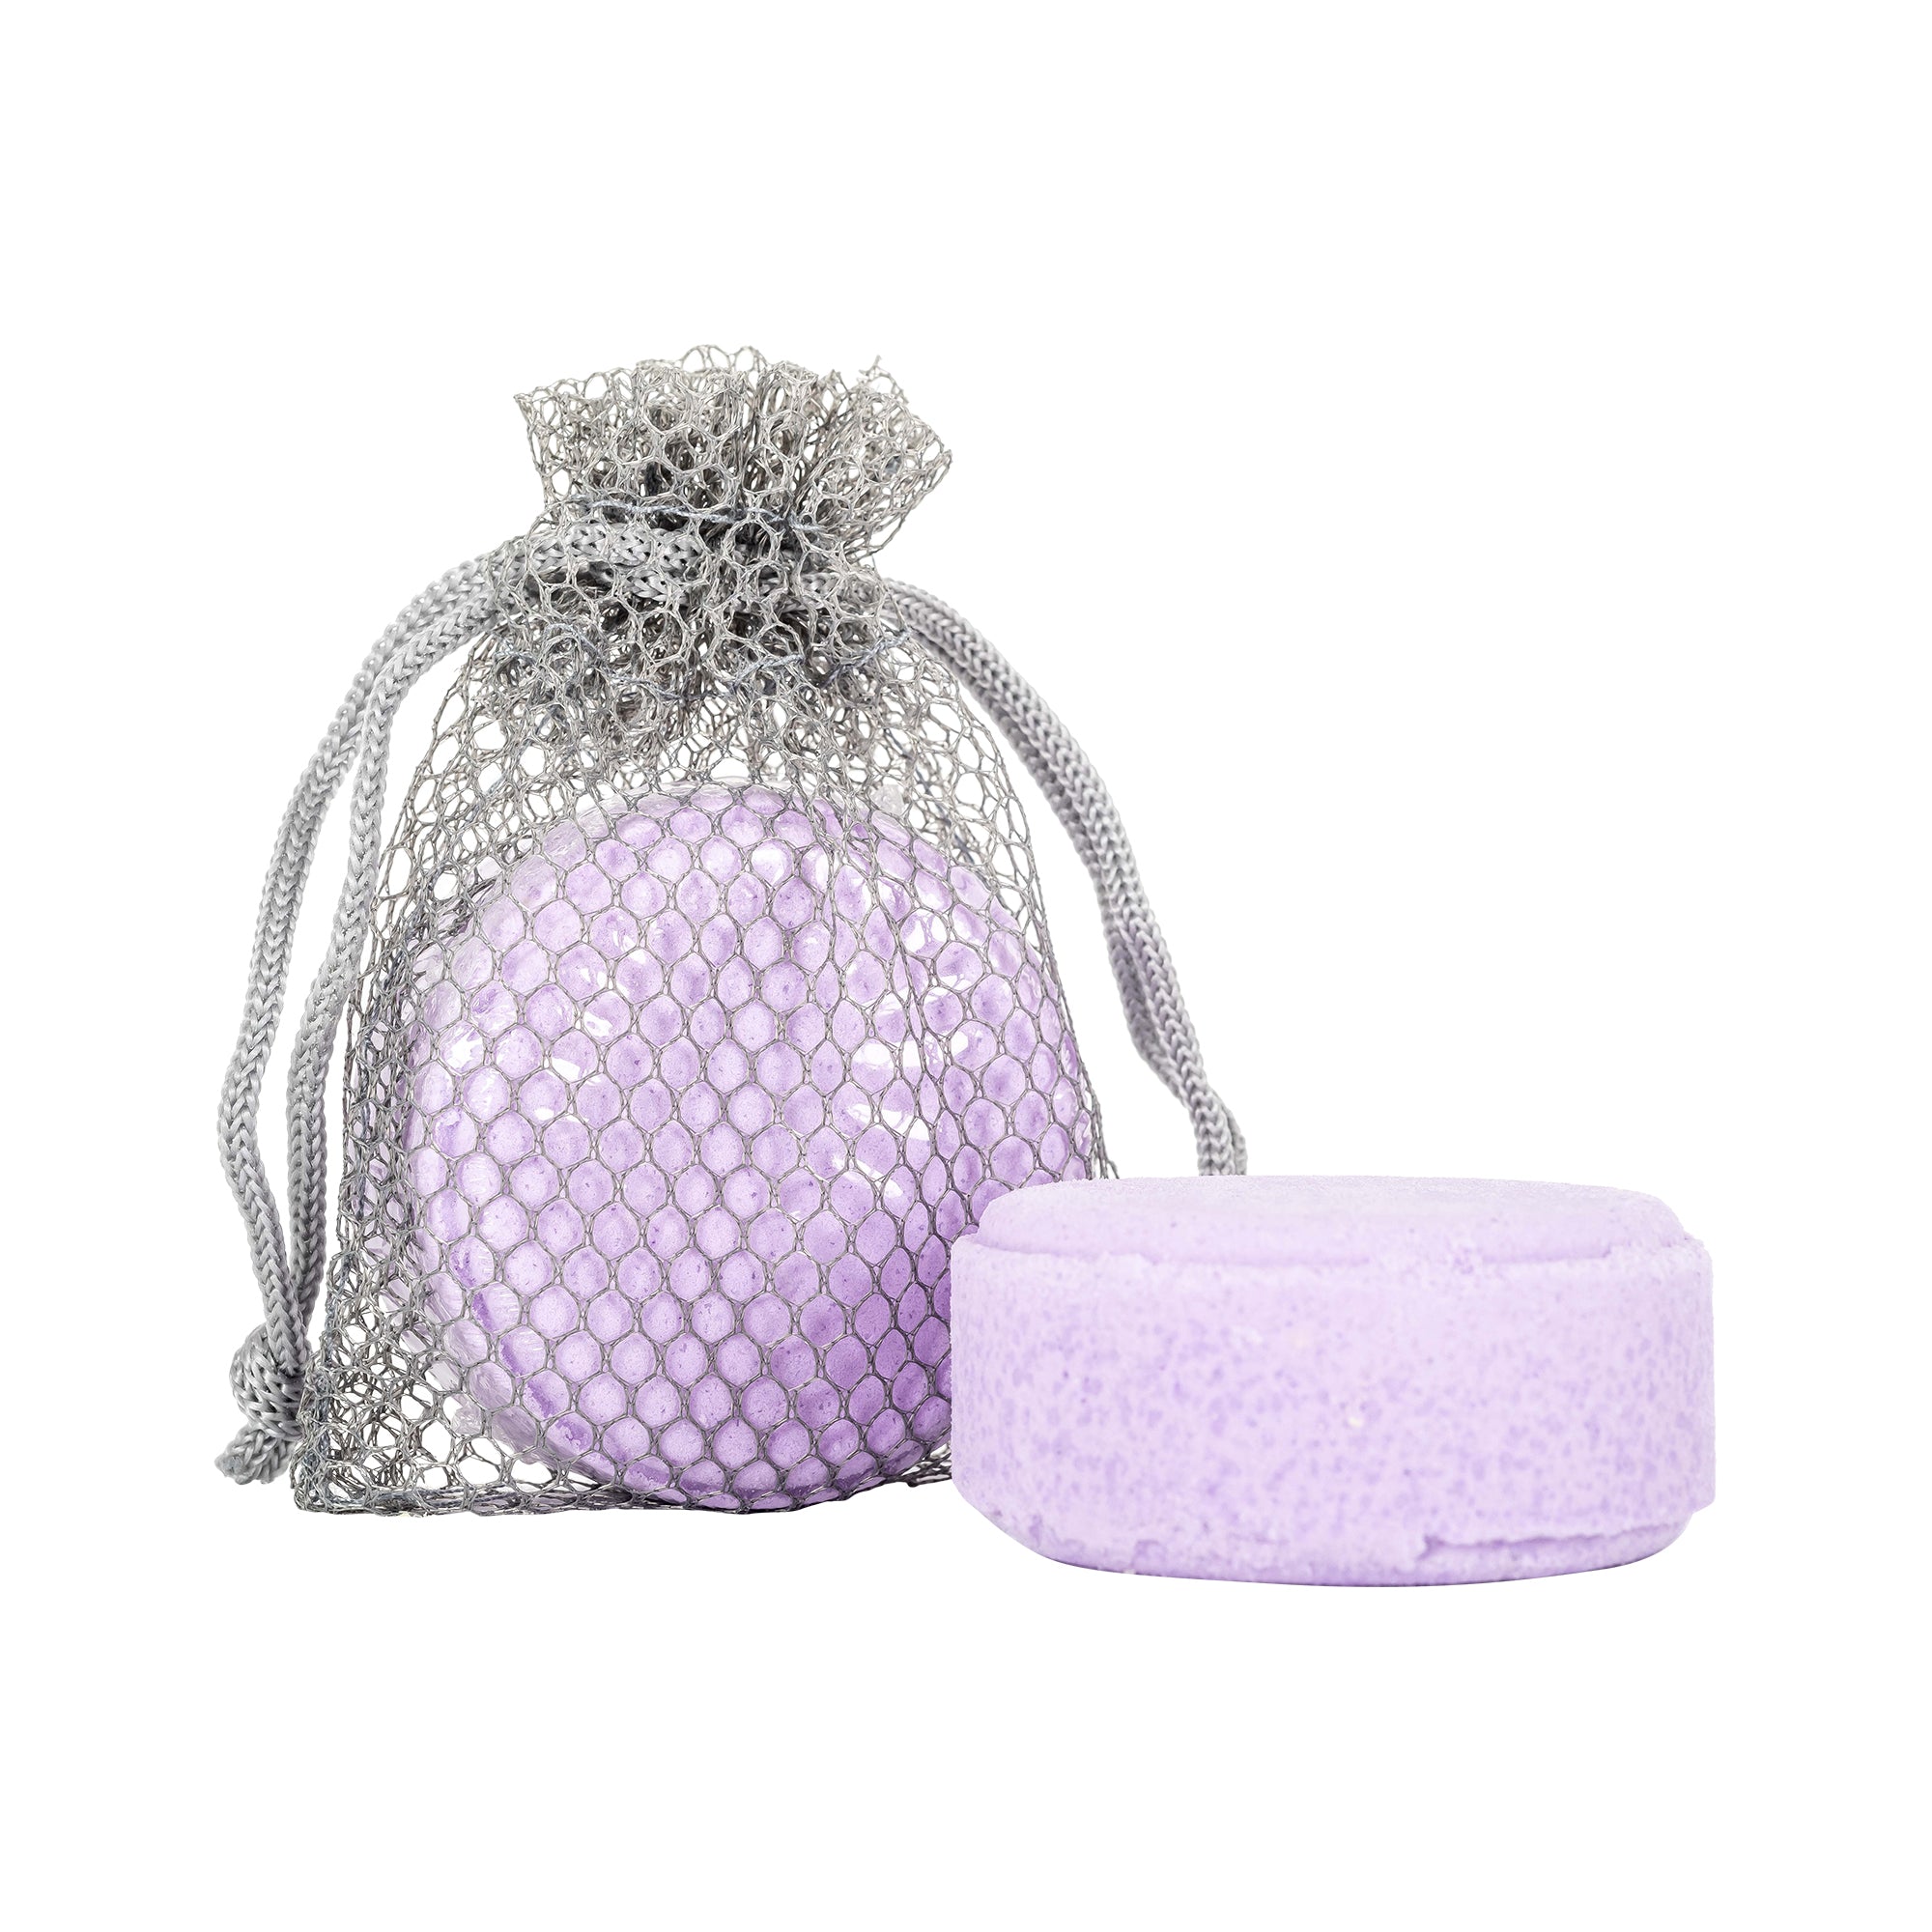 Amethyst - Aromatherapy Shower Steamer Cube Display